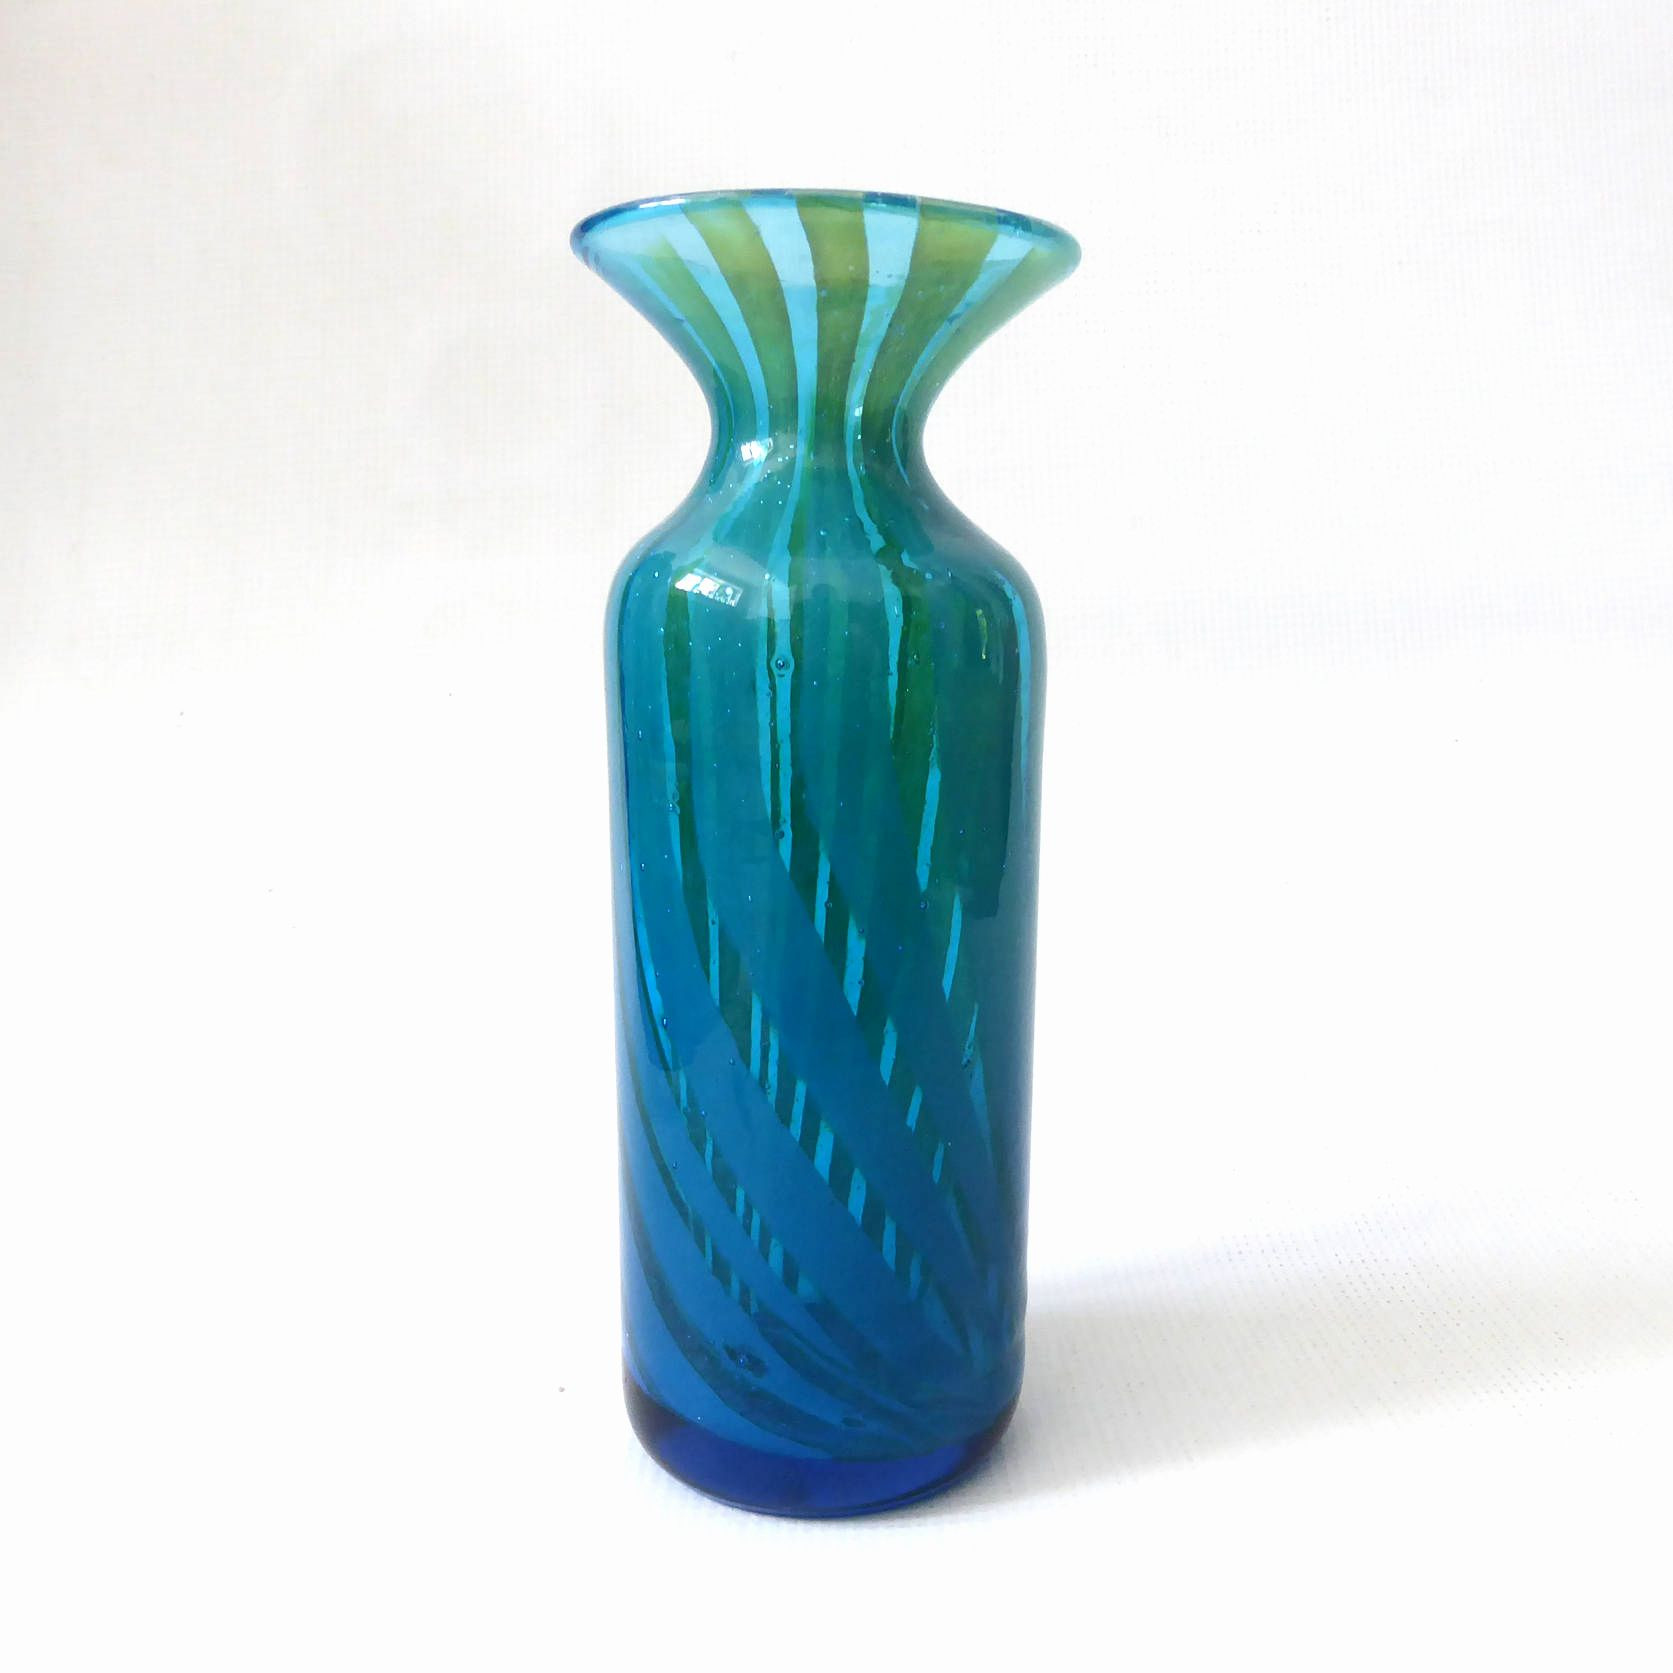 13 Recommended Tall Skinny Vases 2024 free download tall skinny vases of 35 antique green glass vases the weekly world in antique glass vases identify vase and cellar image avorcor